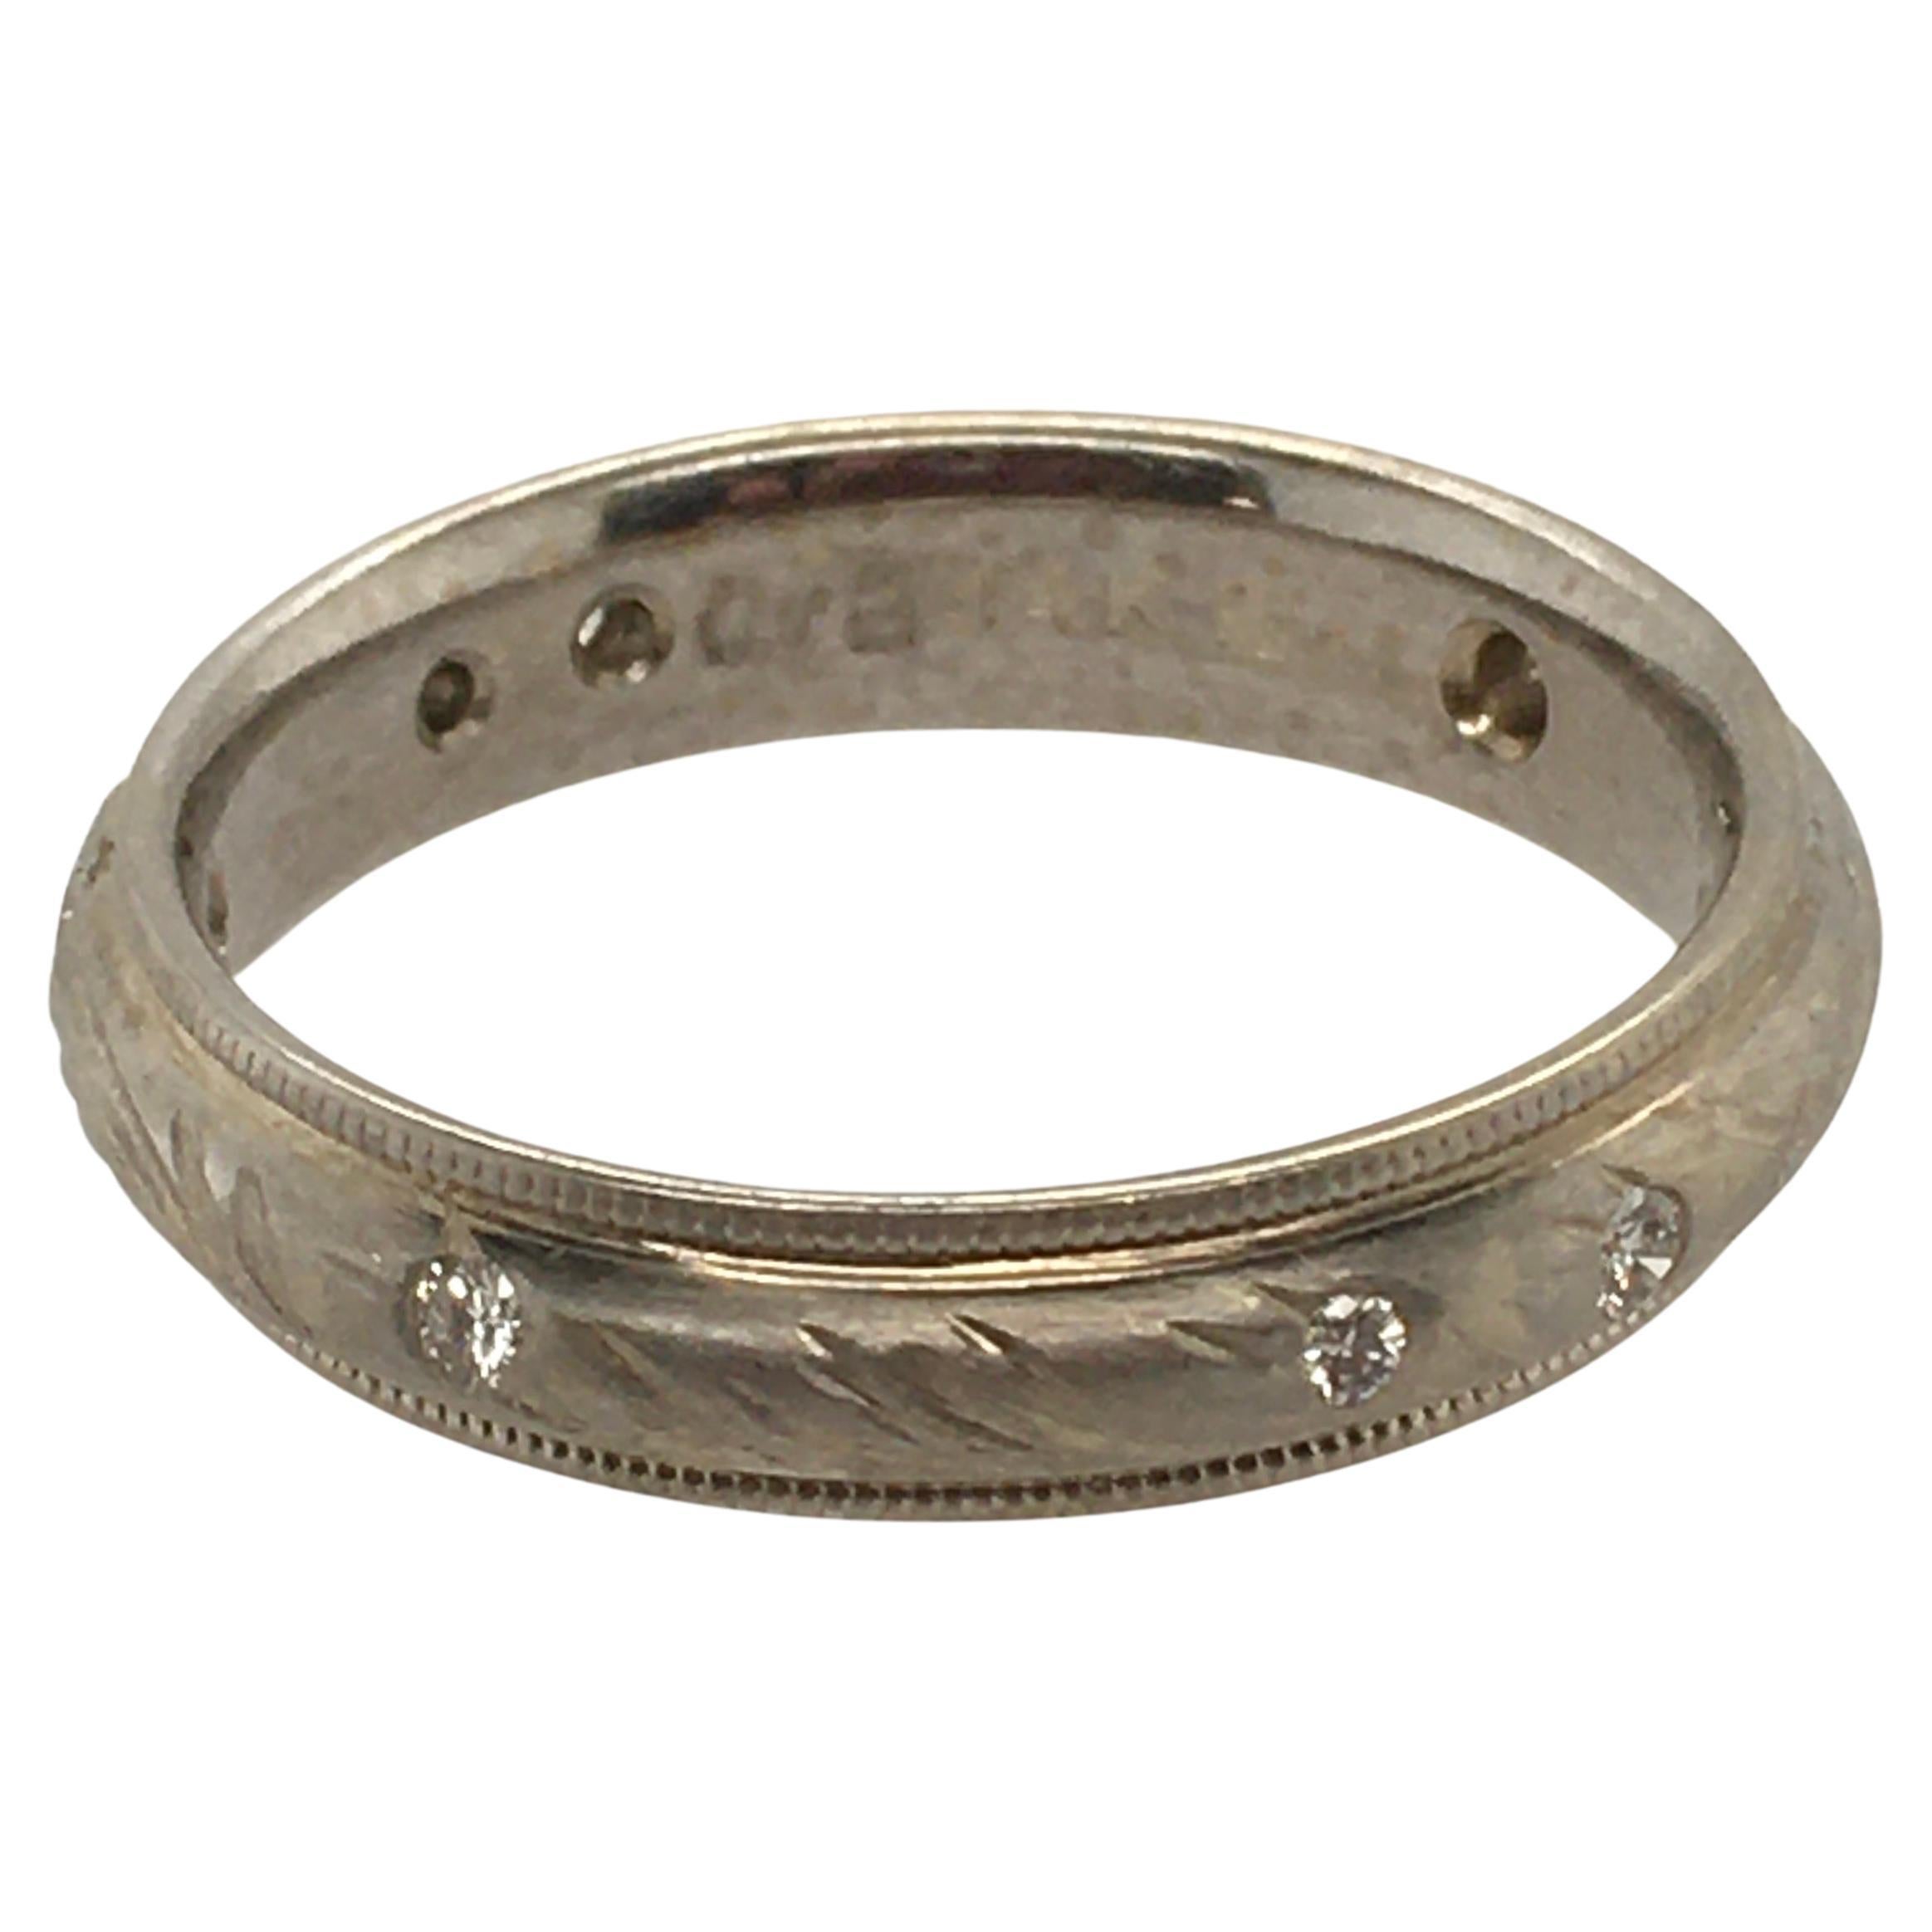 A lovely Constance Wicklund Gildea wedding band: 4mm 14K white gold featuring her sea grass pattern and textured edges.  The ring showcases  8 flush .10TCW diamonds surrounding the band. Maker's mark printed on the interior.  The ring is size 7.